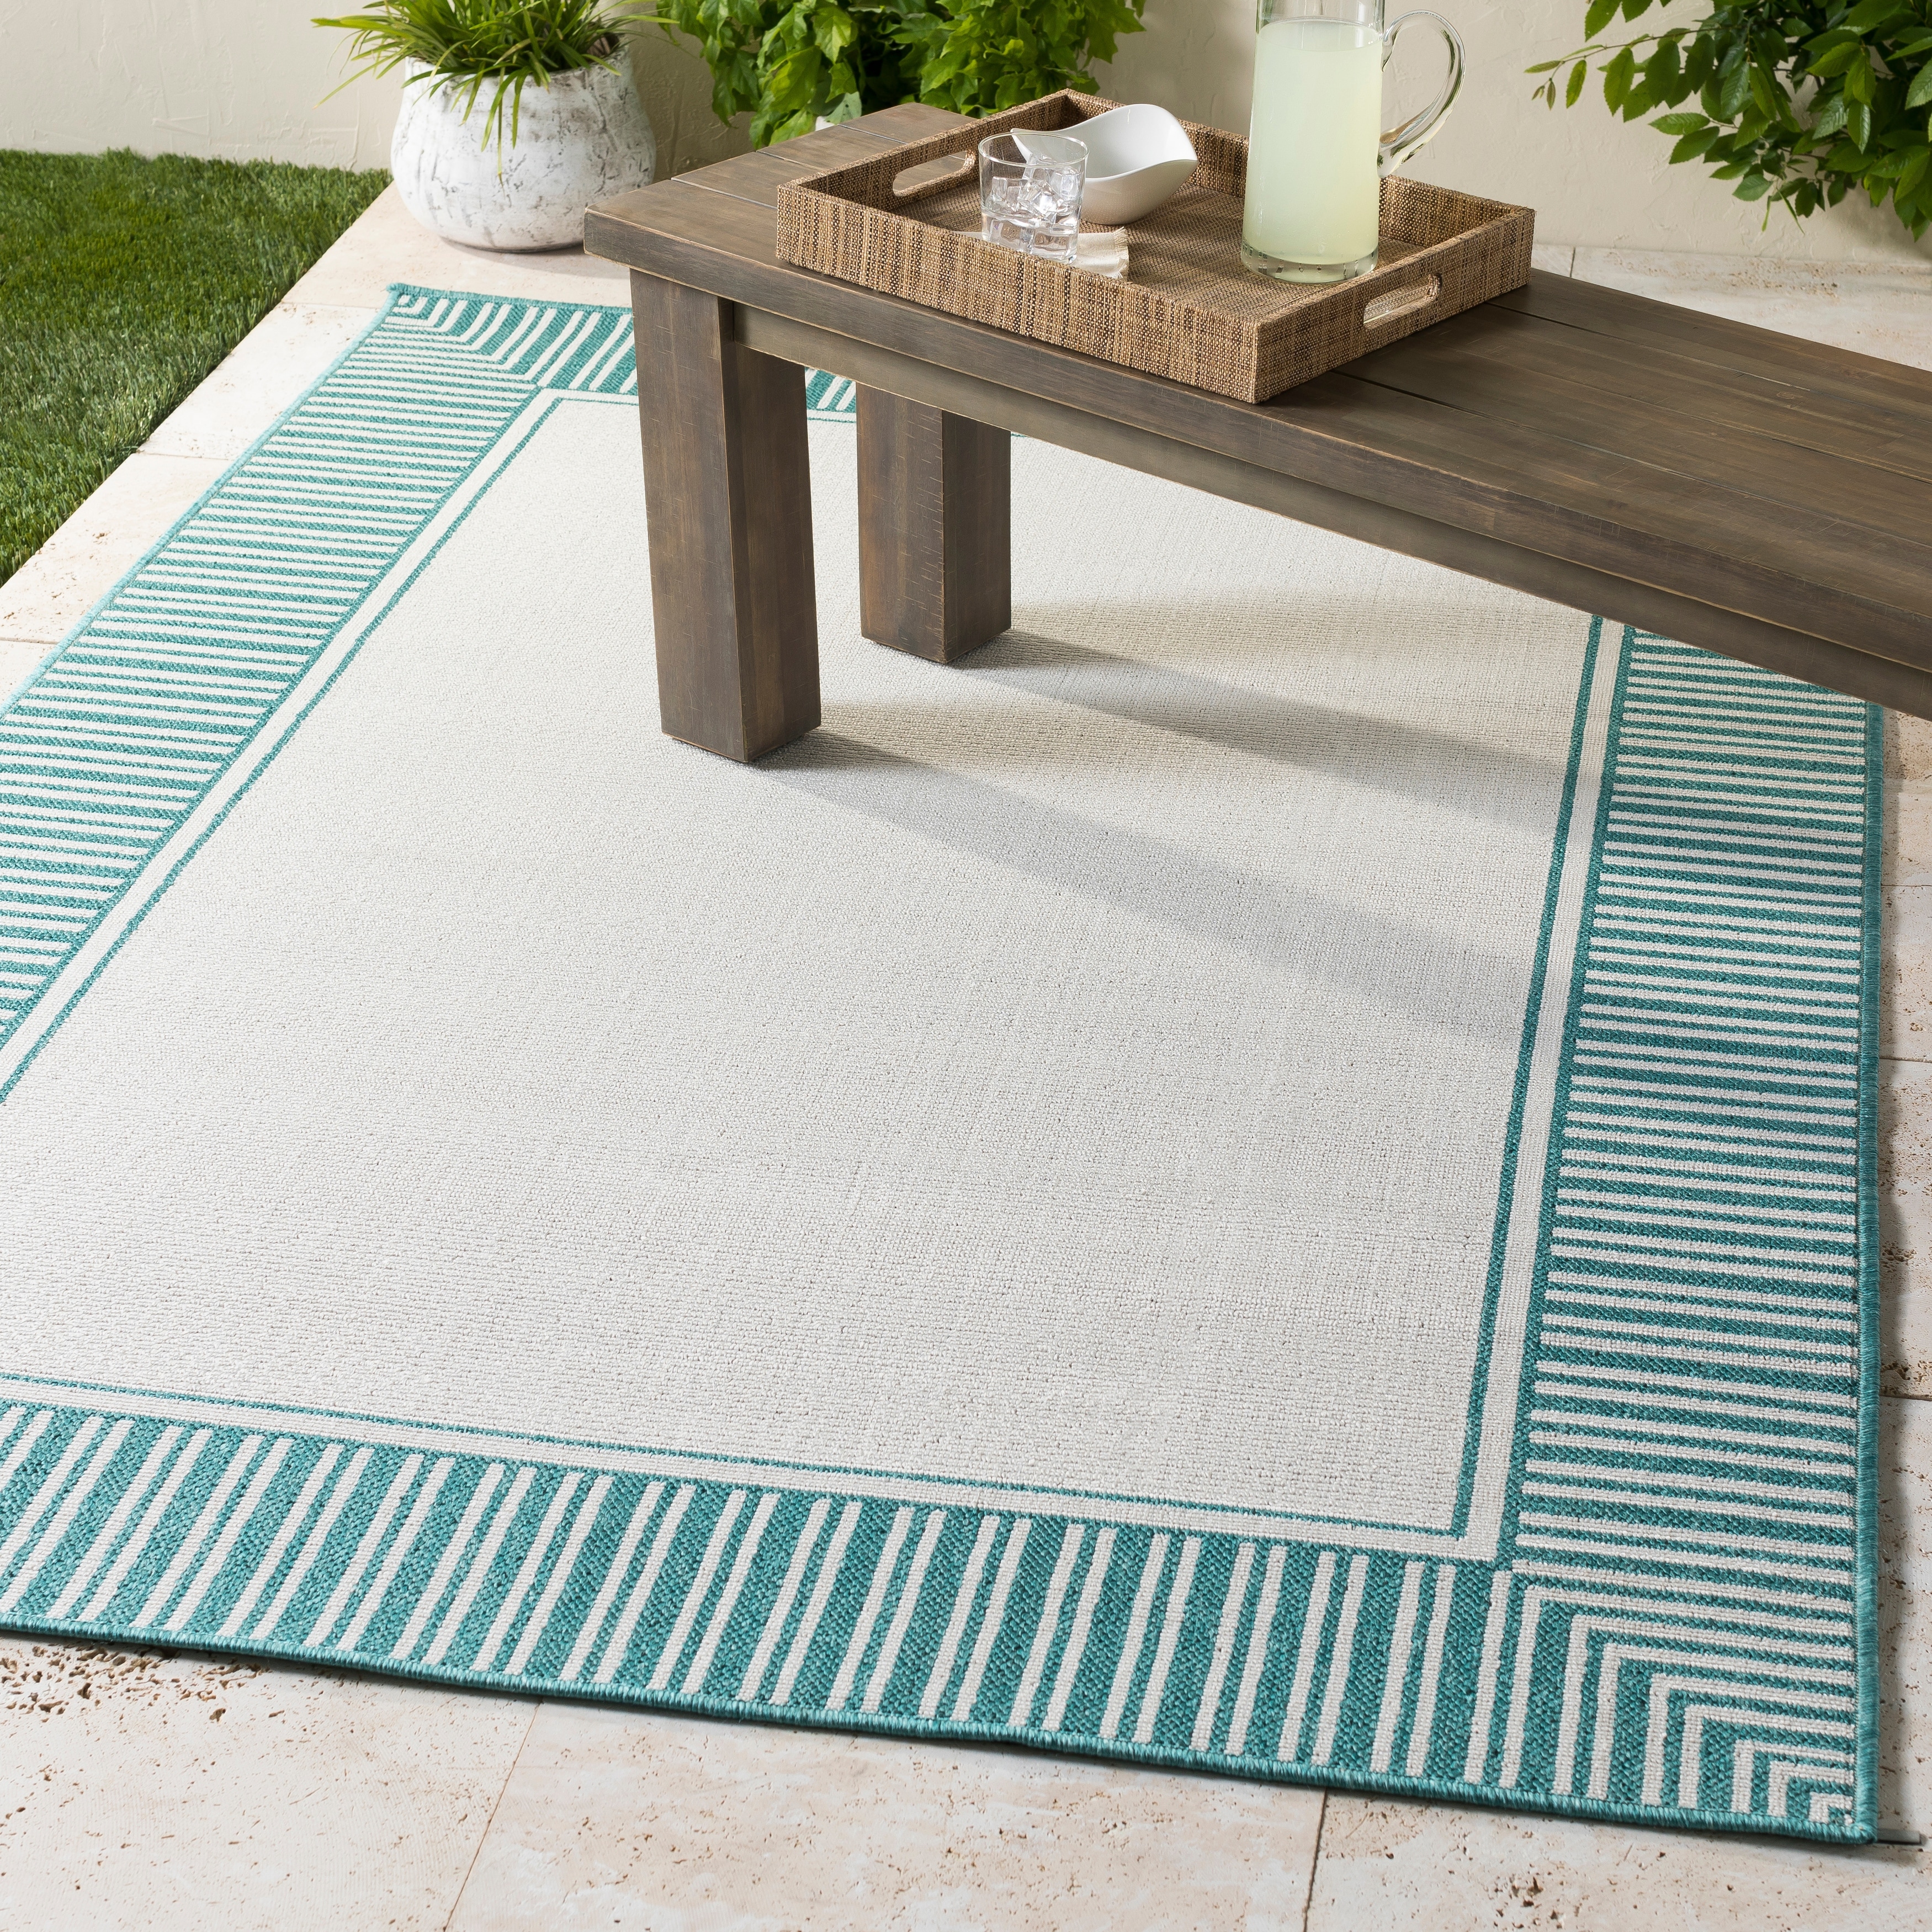 2' X 5' RUNNER CORAL CORAL BORDER RUG "CAPE CORAL" INDOOR OUTDOOR RUG 